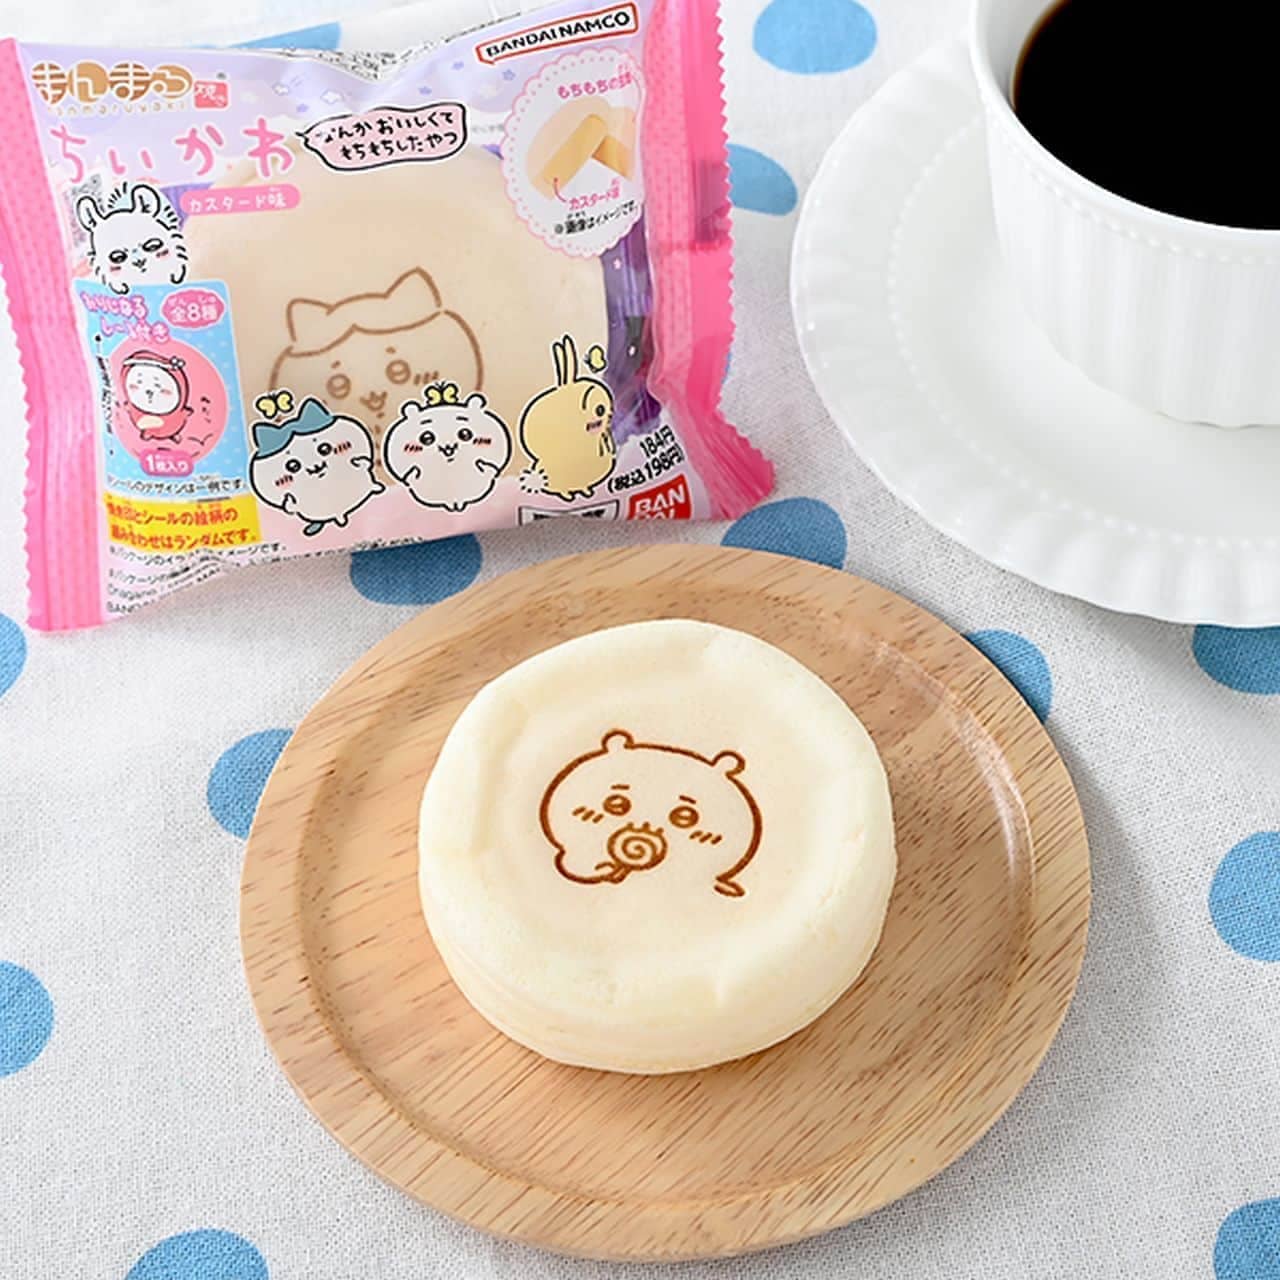 Newly released on November 22nd: Famima's new sweets!